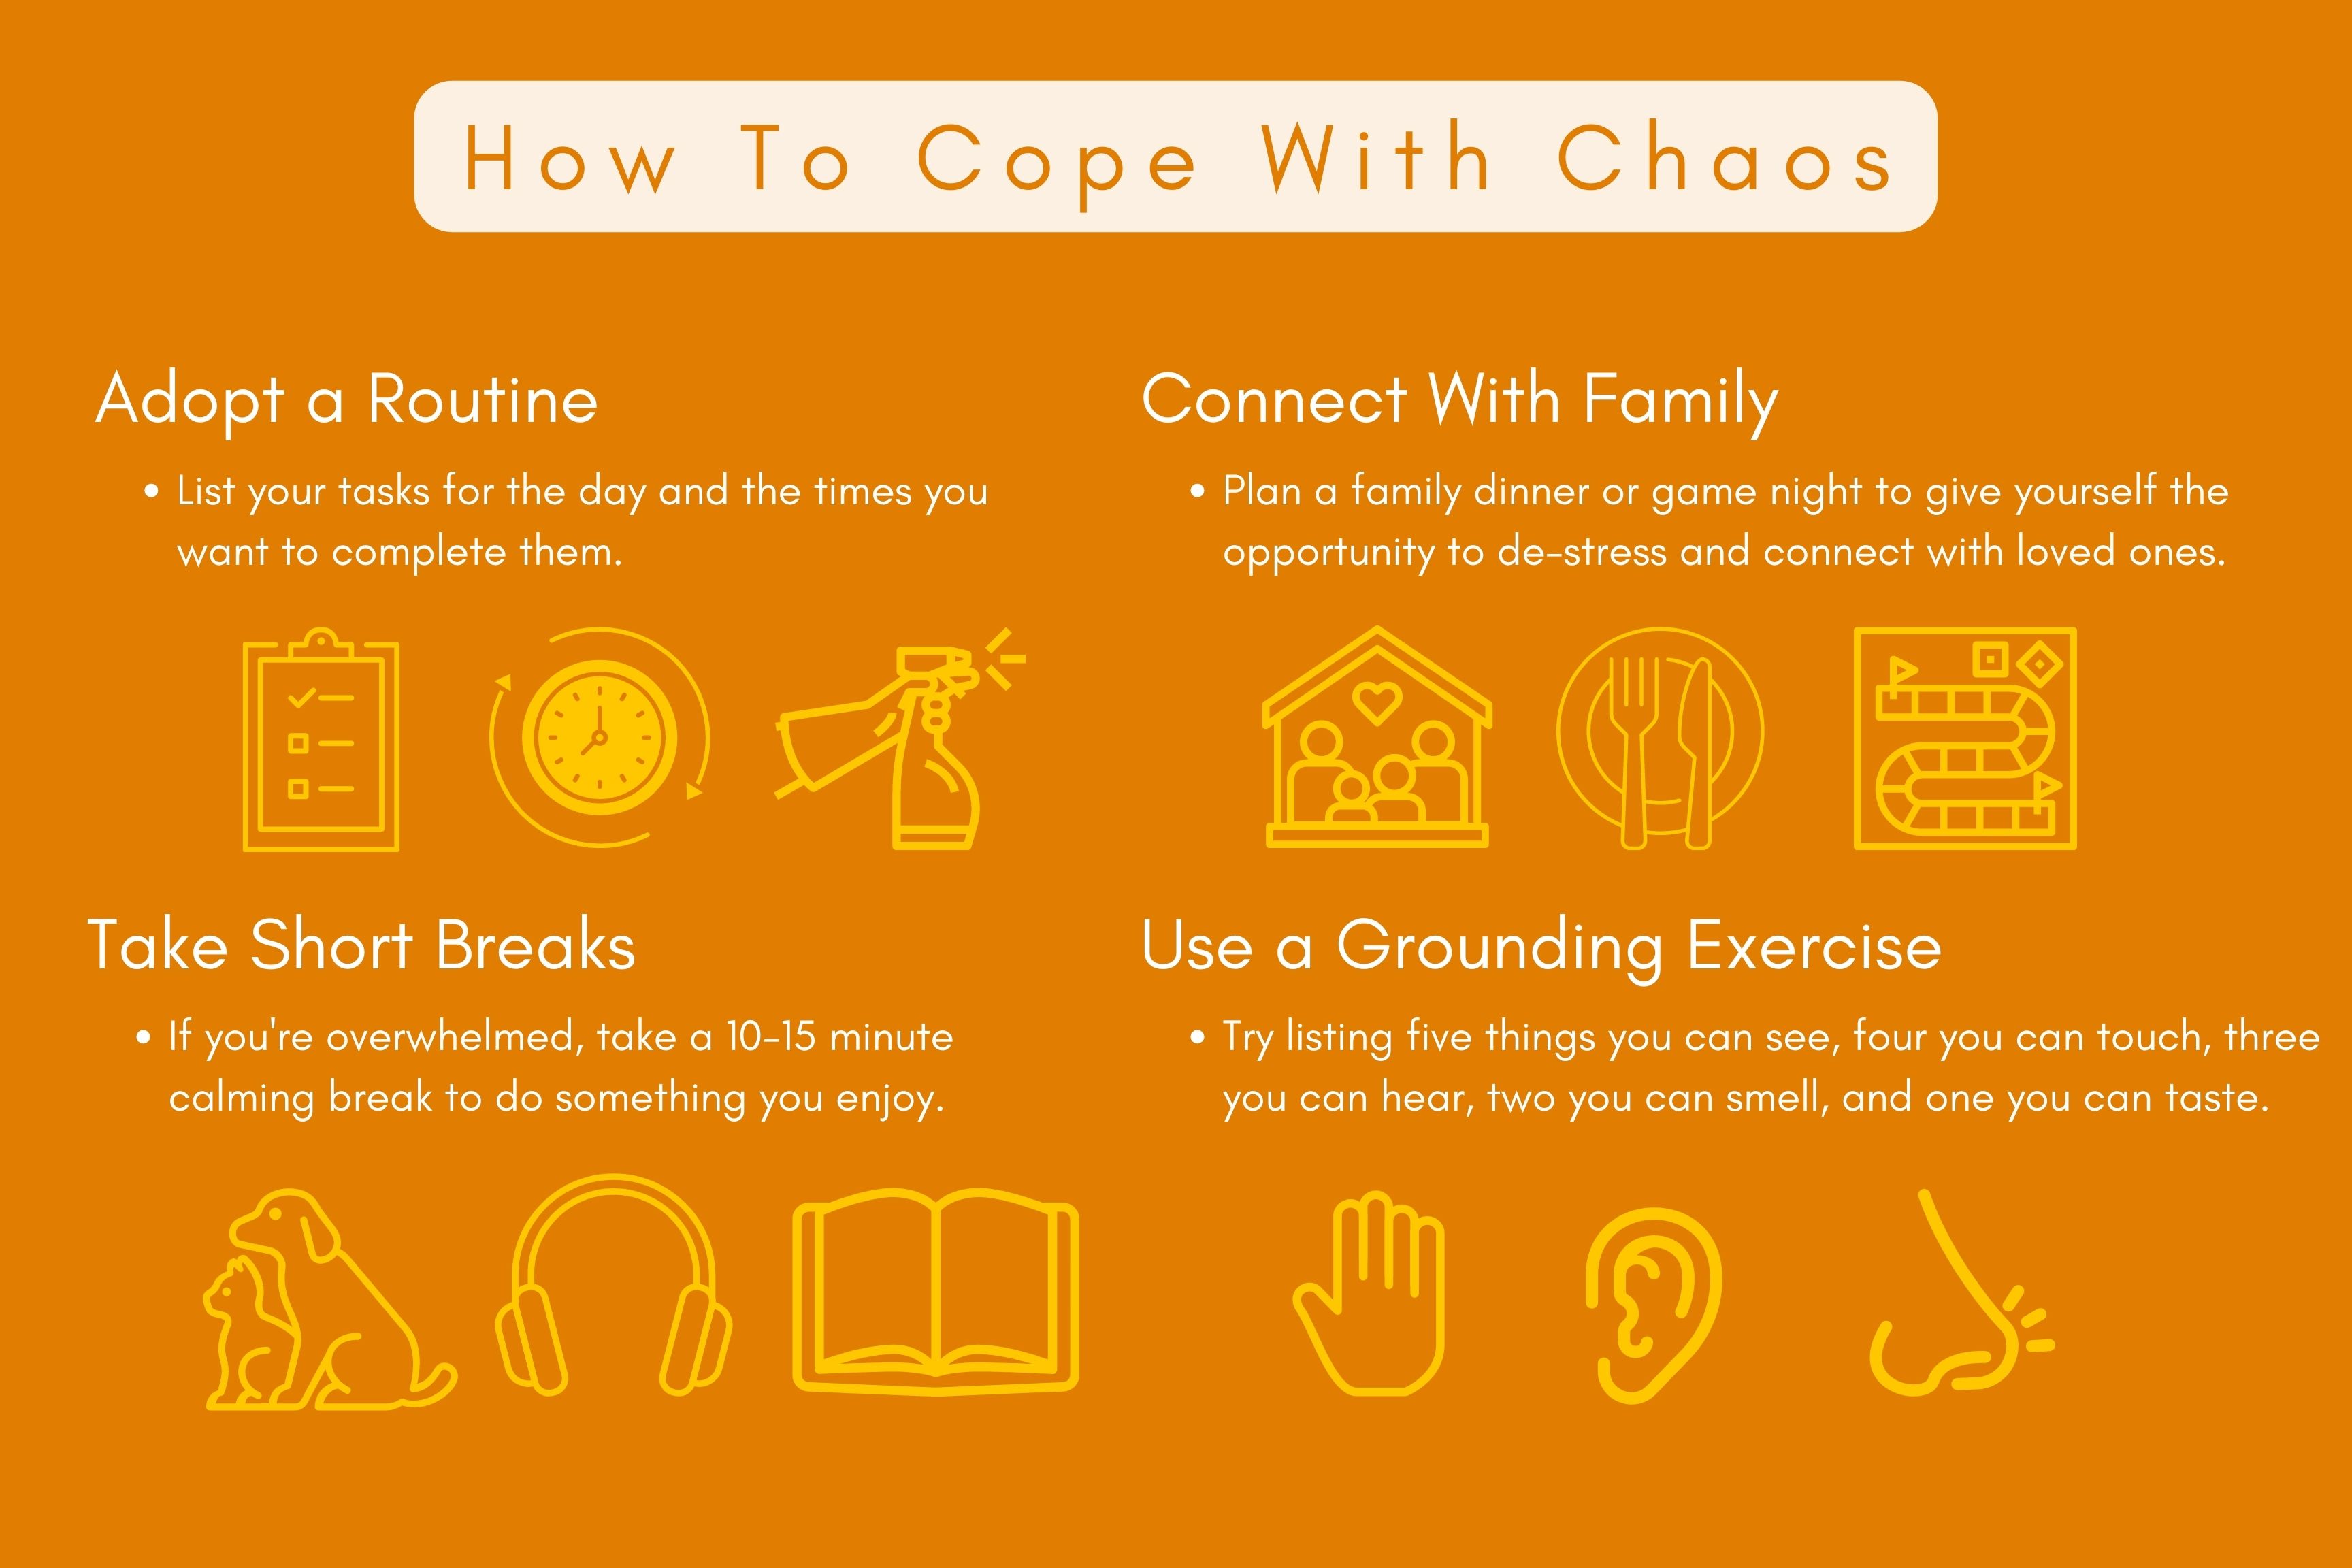 How to Cope With Chaos infographic